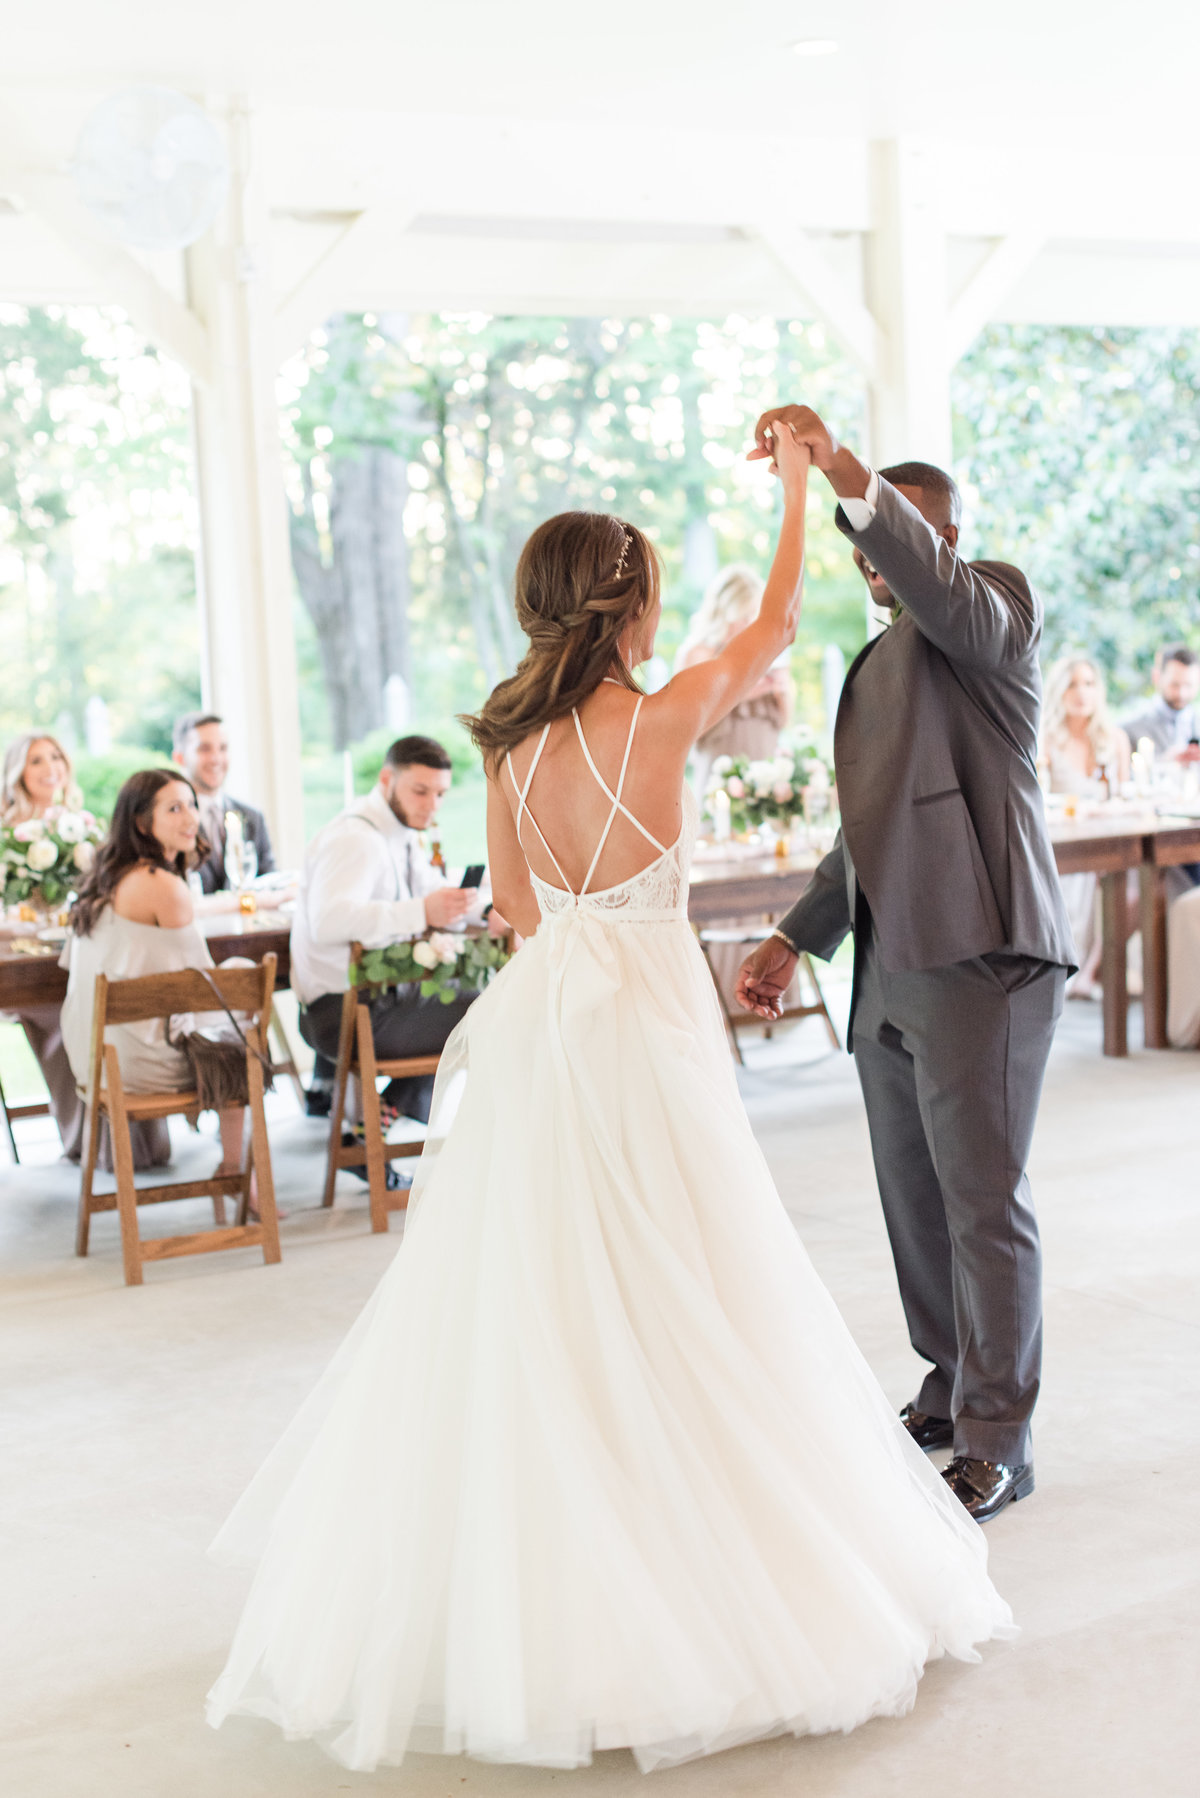 First dance at Seven Springs Farm Wedding